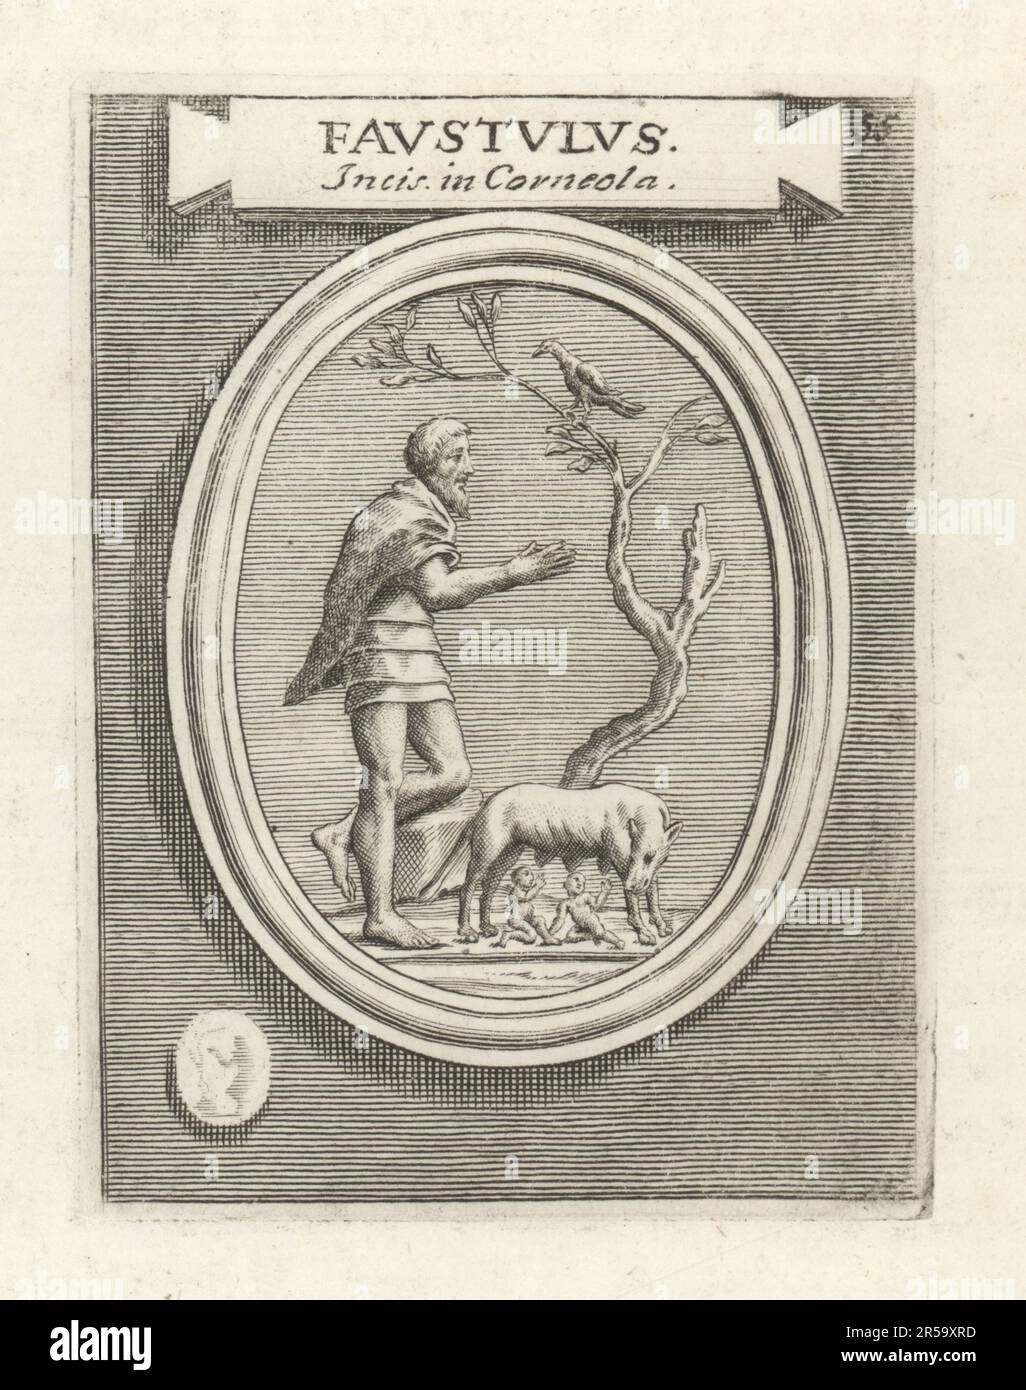 The shepherd Faustulus finding Romulus and Remus suckled by the she-wolf Lupa. In Roman mythology, the twins would become founders of Rome. From an engraved cornelian gem. Faustulus Incis in Corneola. Copperplate engraving from Francesco Valesio, Antonio Gori and Ridolfino Venuti’s Academia Etrusca, Museum Cortonense in quo Vetera Monumenta, (Etruscan Academy or Museum of Cortona), Faustus Amideus, Rome, 1750. Stock Photo